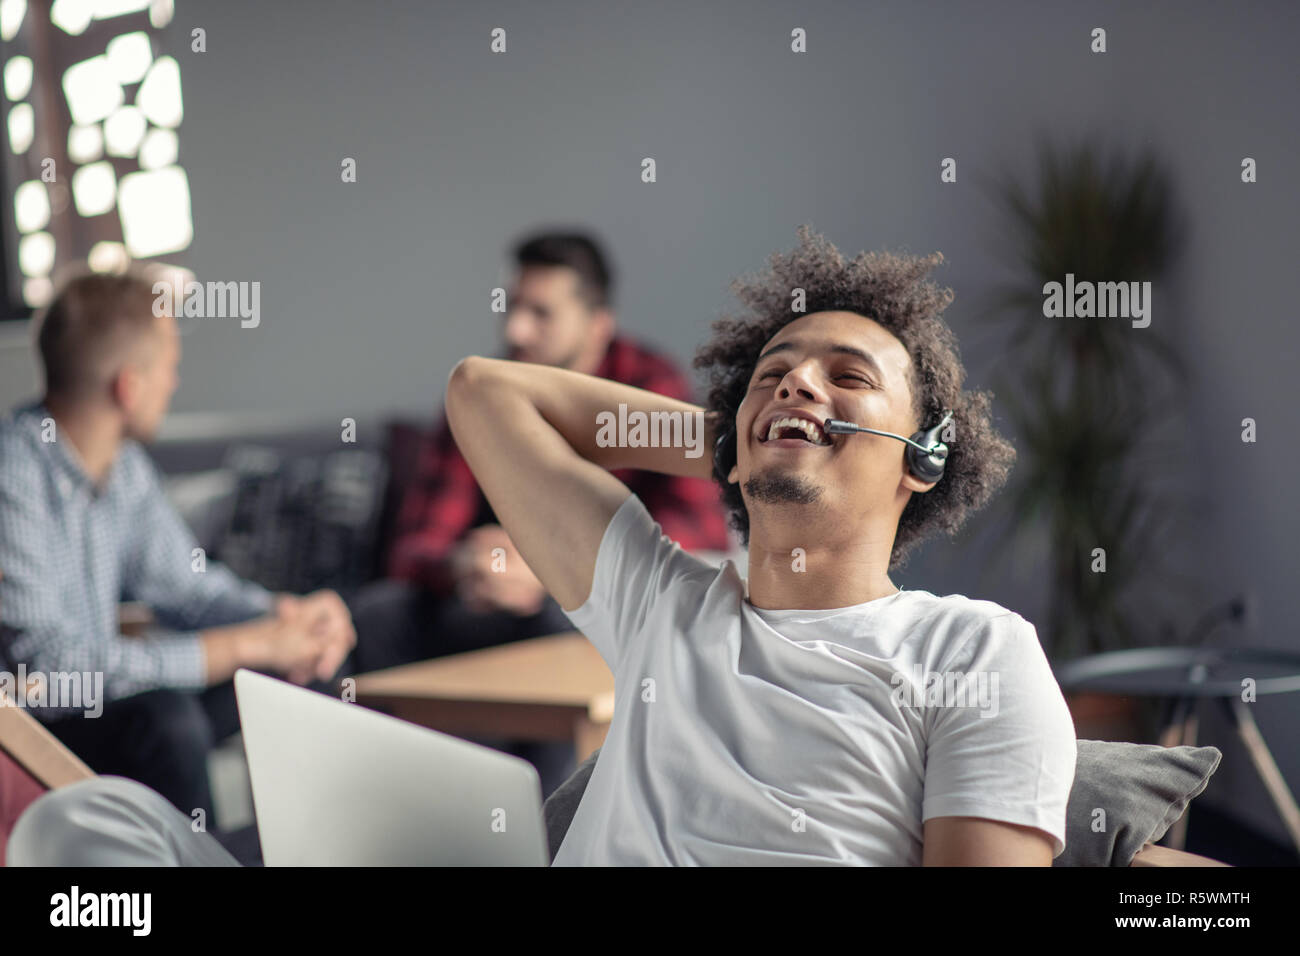 Laughing african american hipster software developer at computer at office of startup company Stock Photo